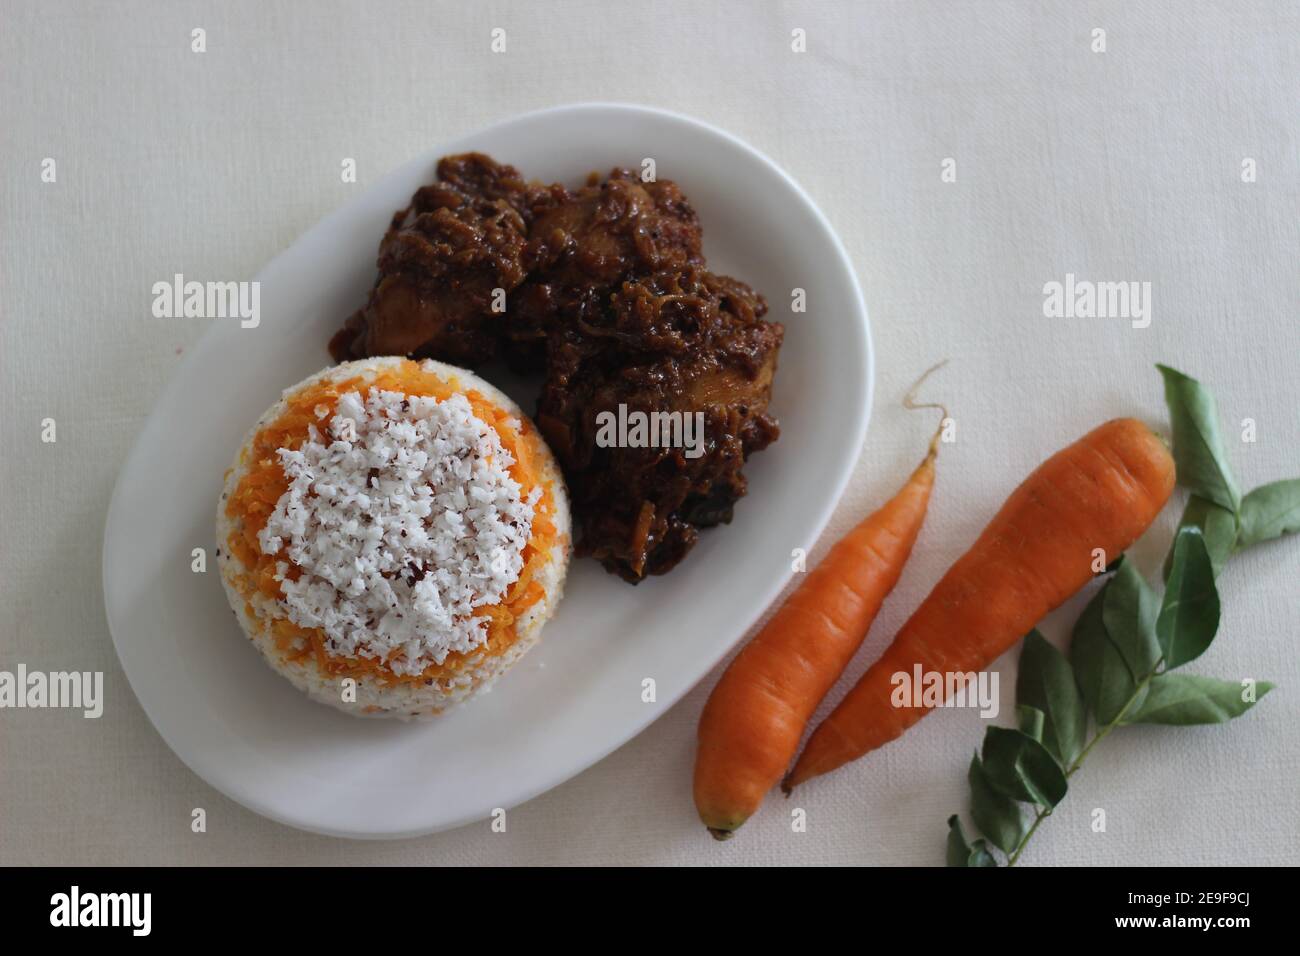 Carrot puttu, a variety of Kerala rice steam cake by adding shredded carrots served along with chicken roast prepared in Kerala style with coconut oil Stock Photo